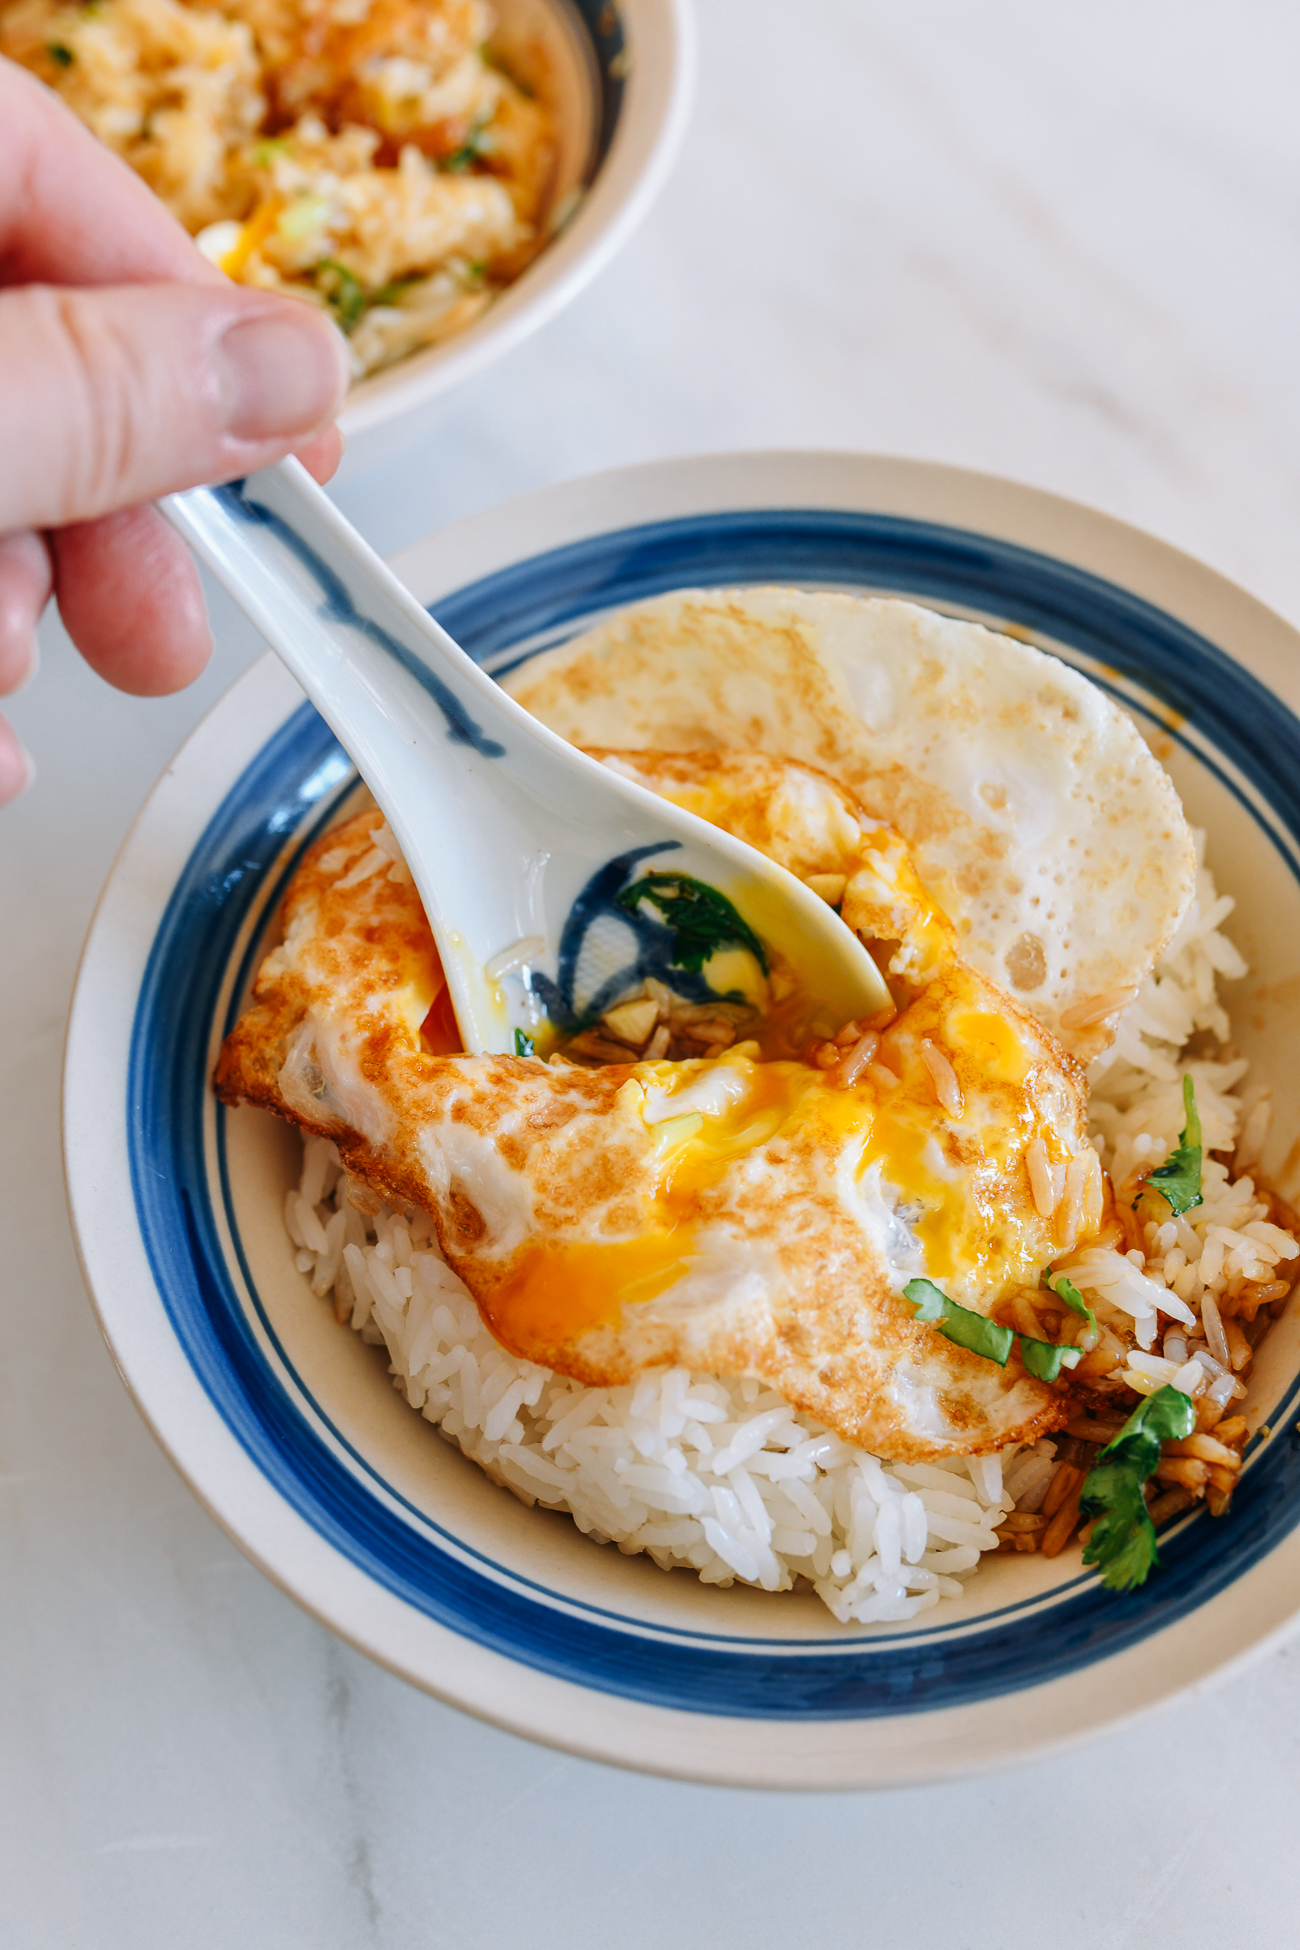 Chinese Mixed Rice Ban Fan with Egg